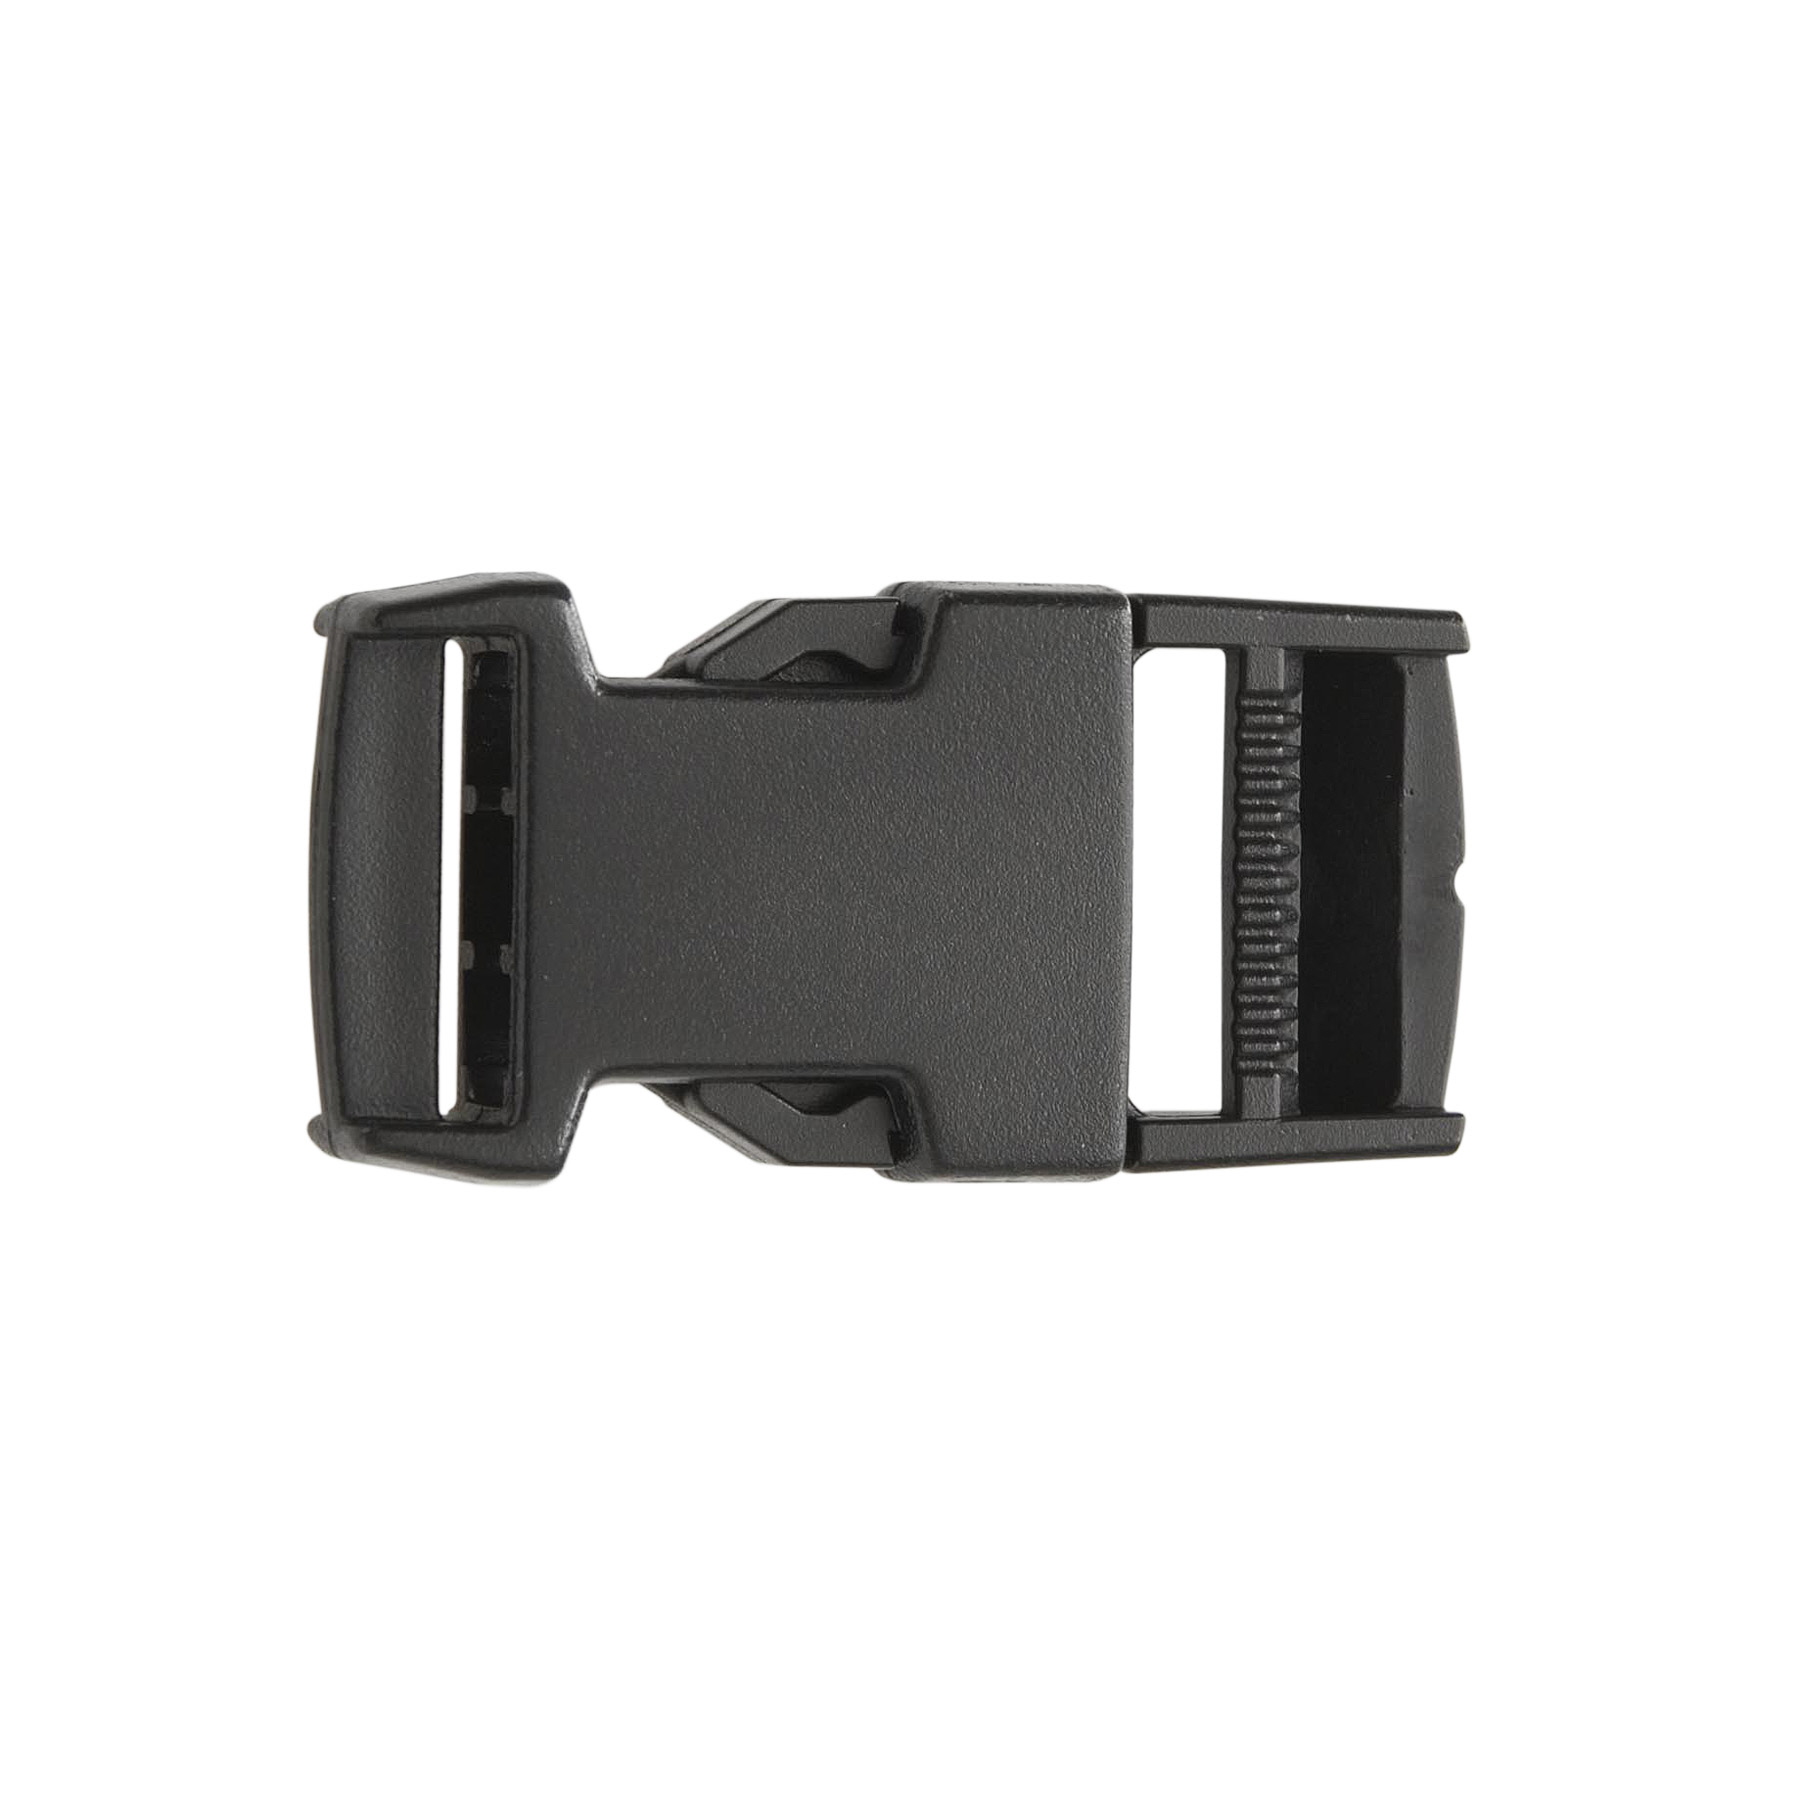 1 Dual Side Relase Buckles from Industrial Webbing Corp